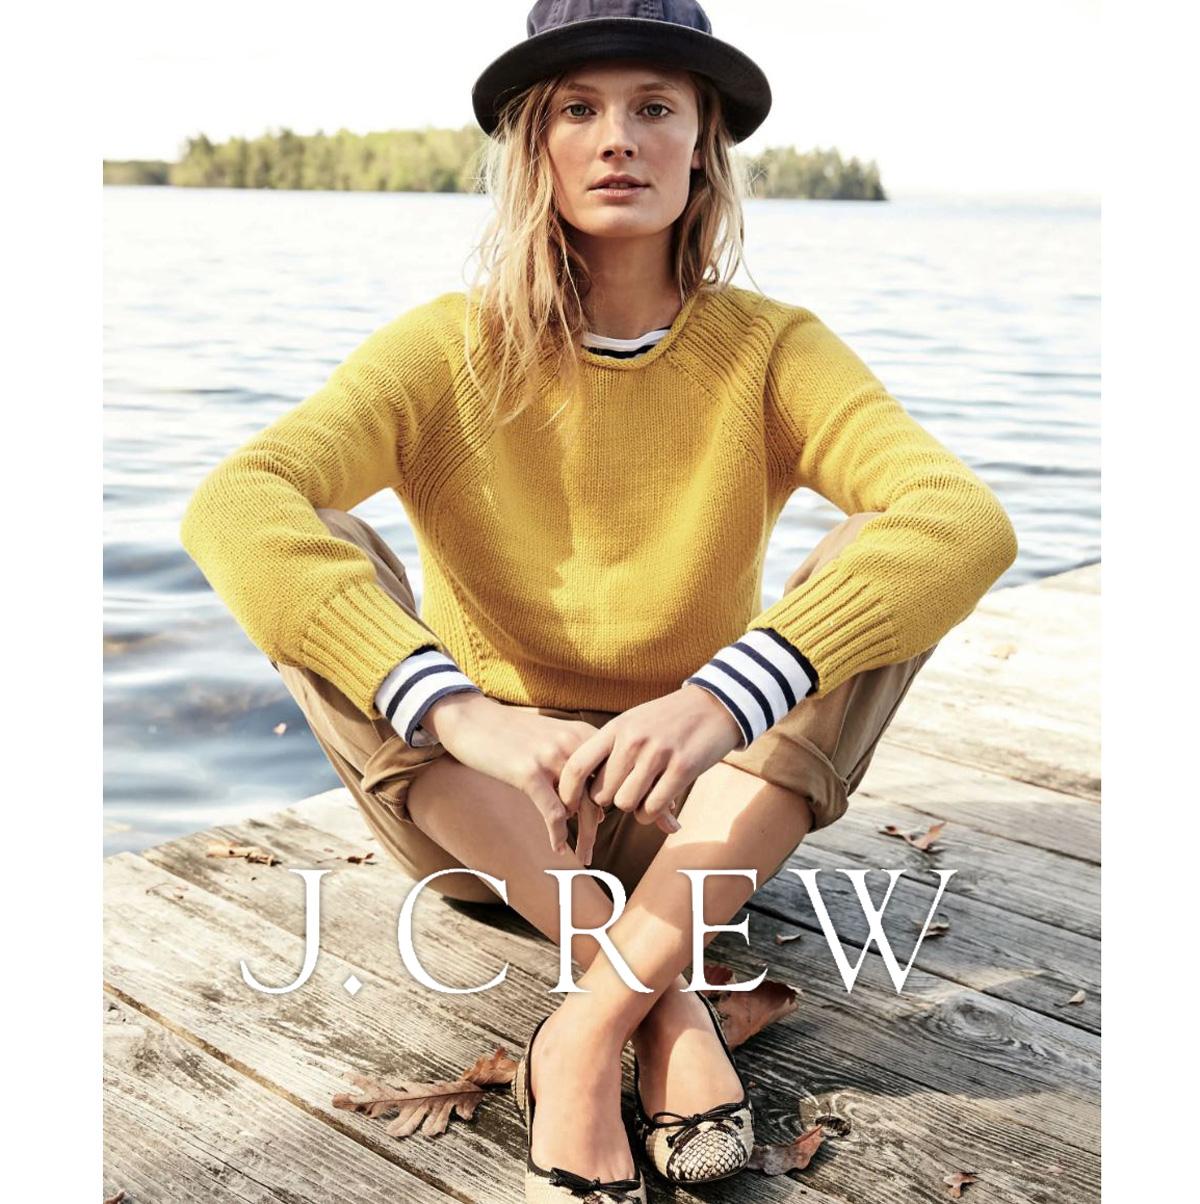 J Crew Women's Size Chart for Clothing, Shoes and Accessories